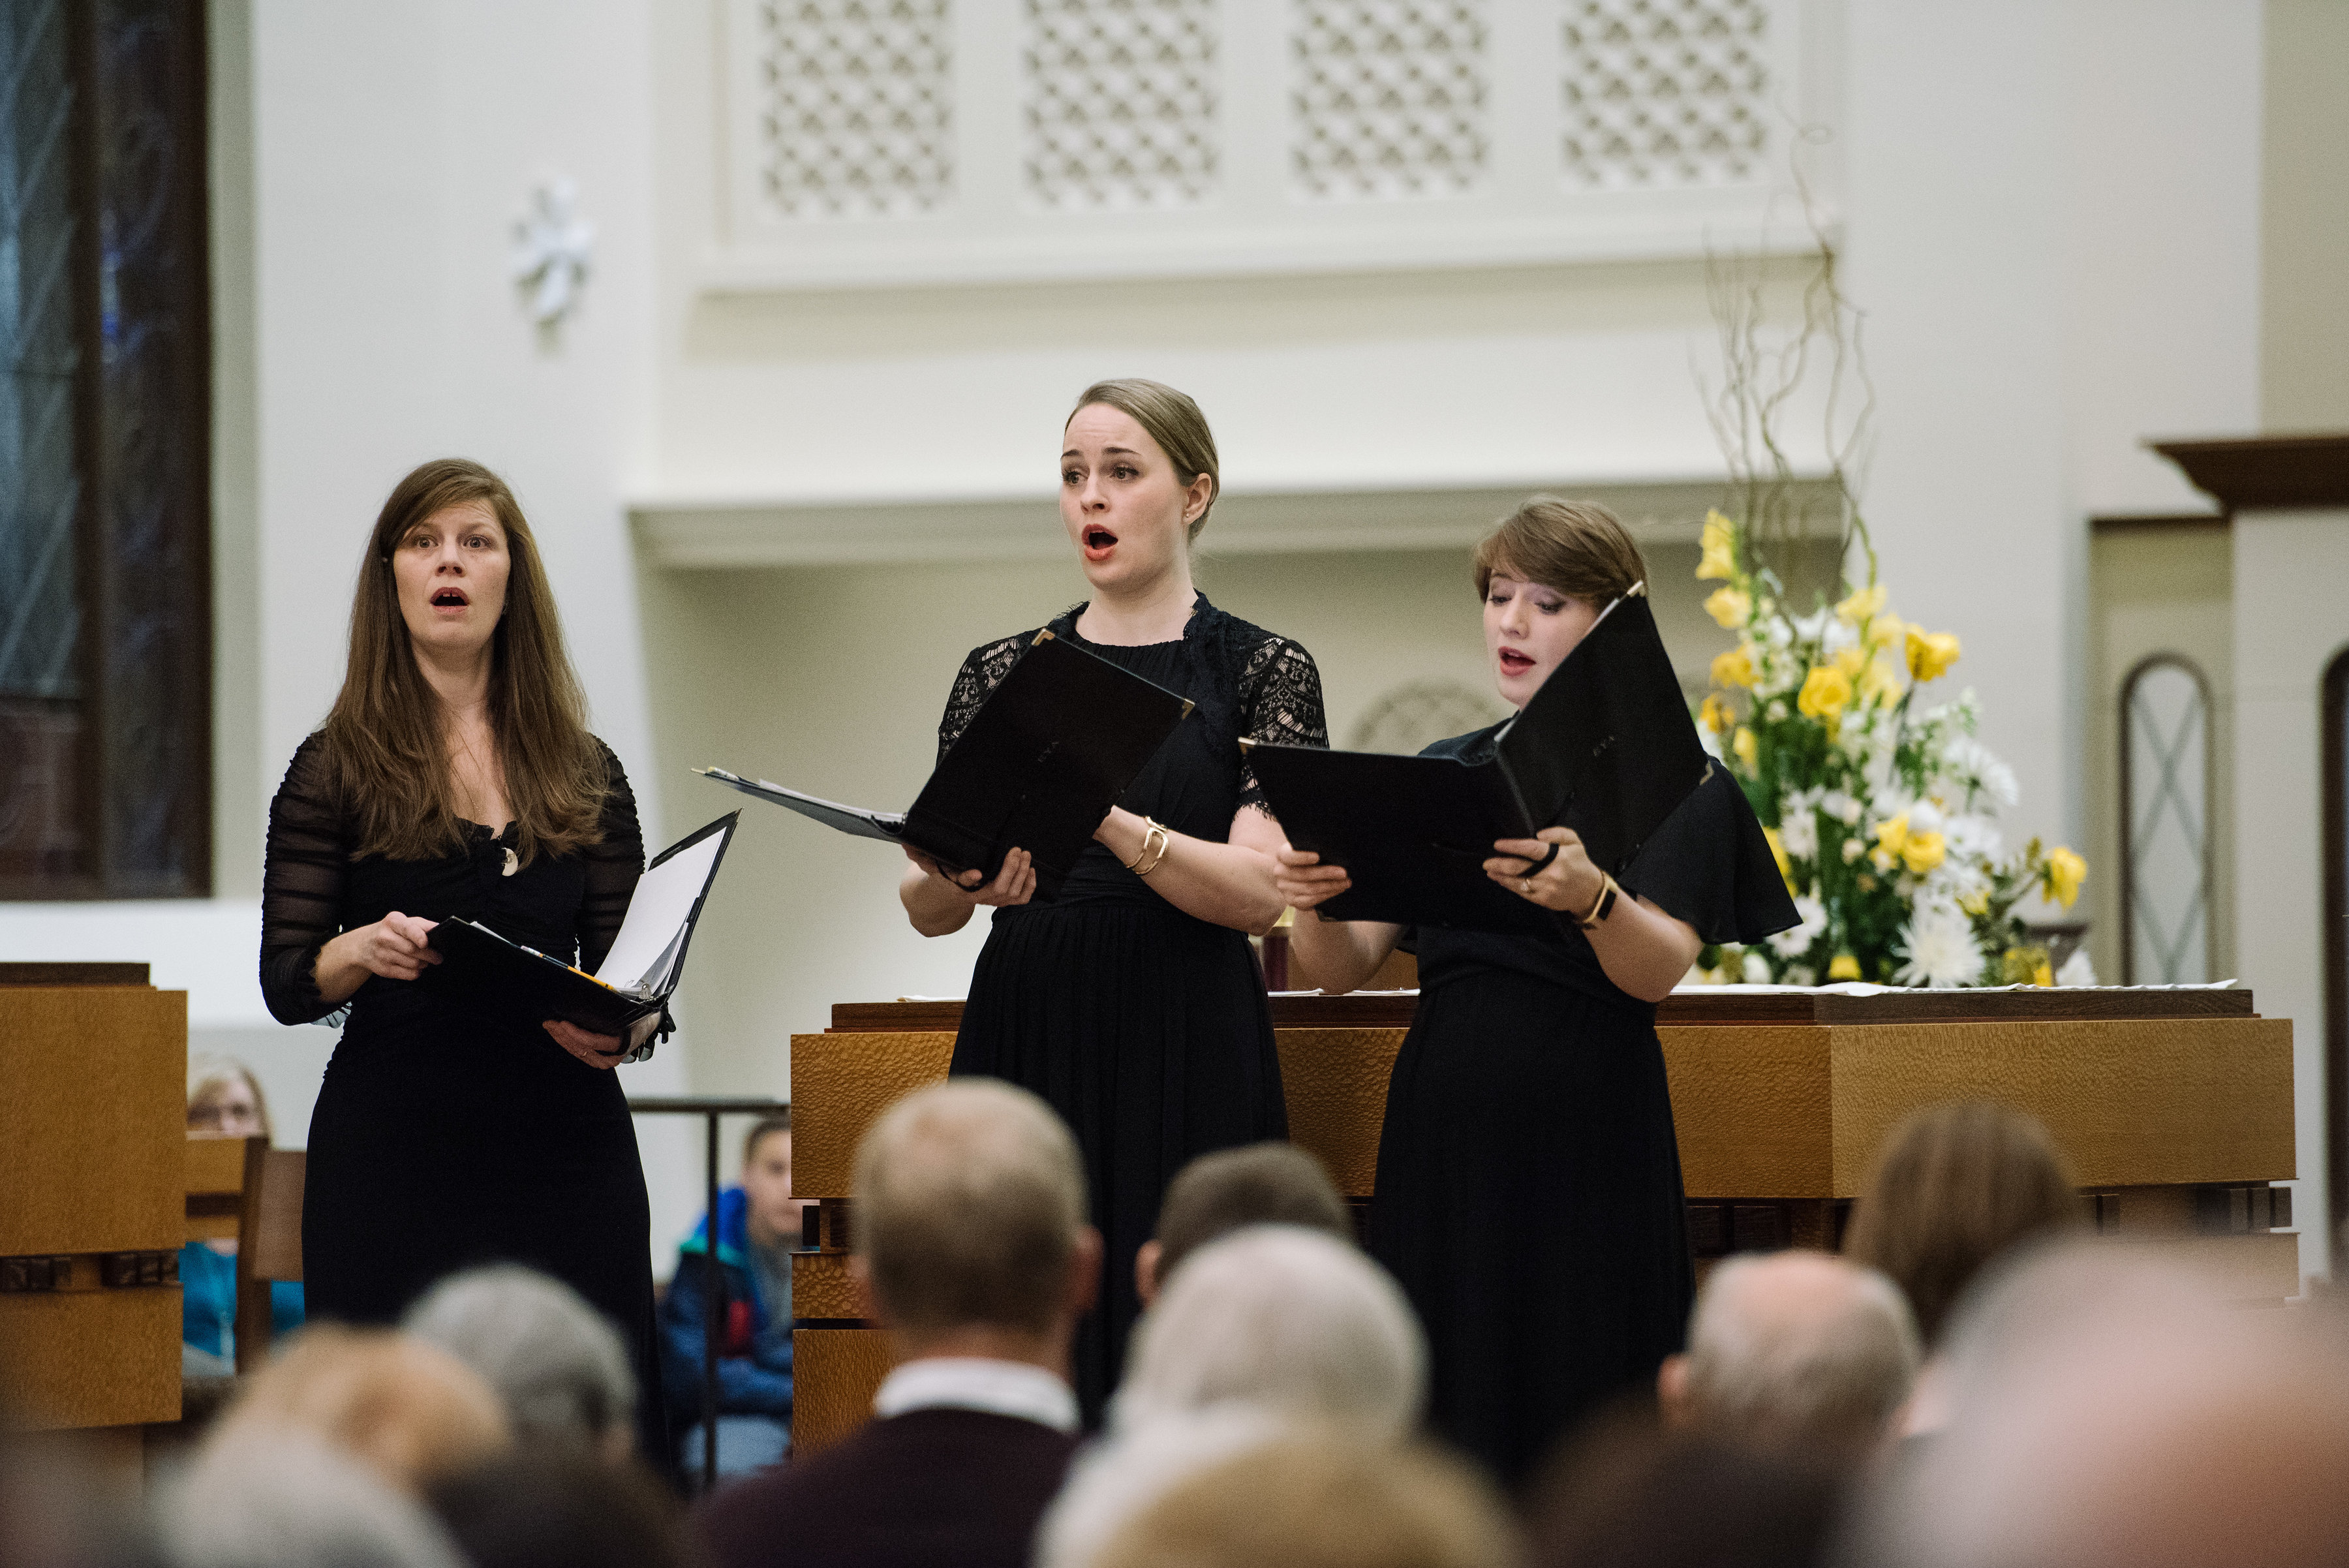 Allison Mondel, a soprano, leads the group as director and sings alongside Kristen Dubion-Smith, a mezzo-soprano, and Crossley Hawn, also a soprano